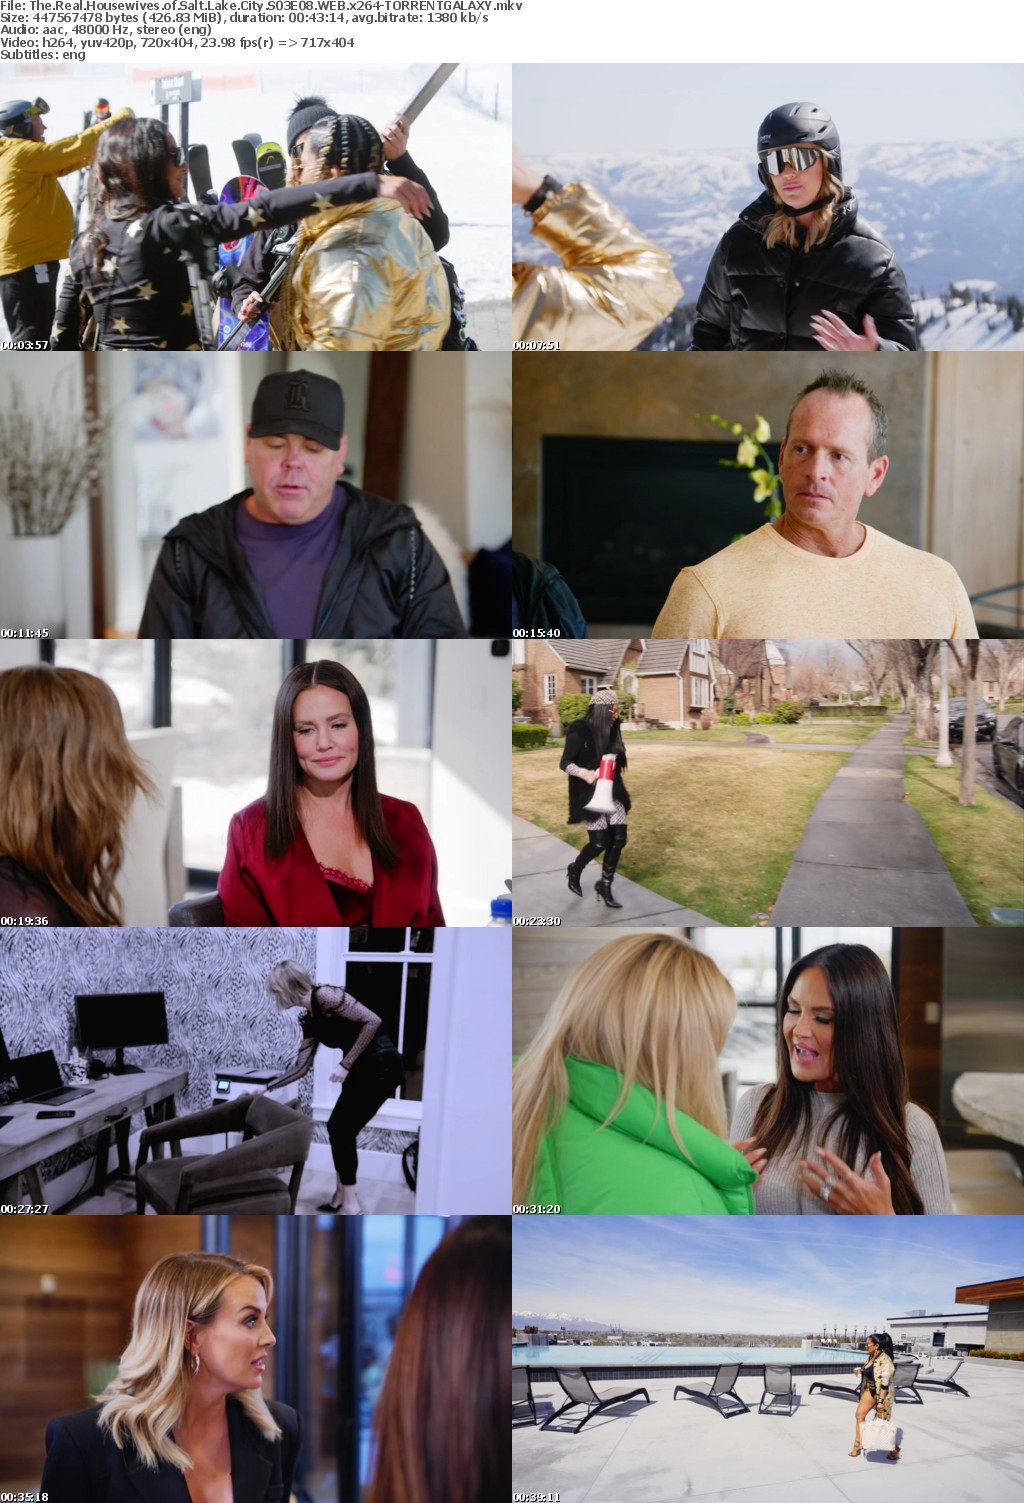 The Real Housewives of Salt Lake City S03E08 WEB x264-GALAXY